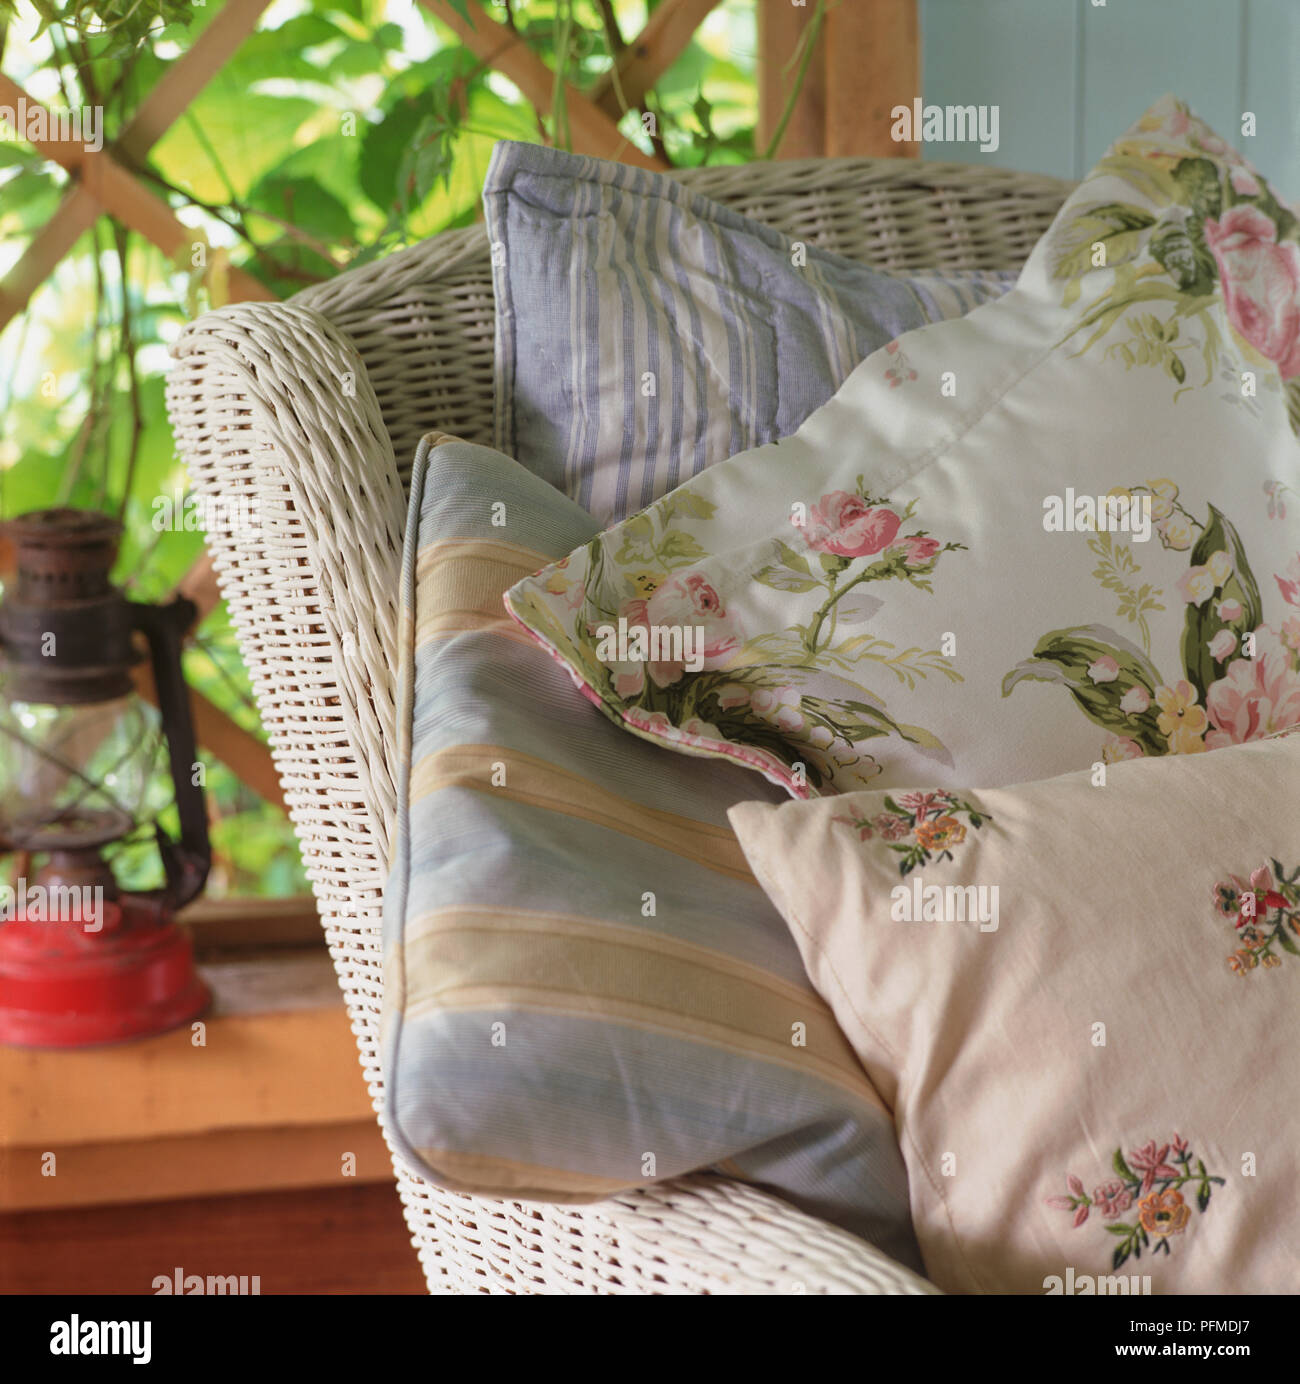 Piles of striped blue and floral white cushions on white wicker chair, wooden trellis and green foliage in background. Stock Photo